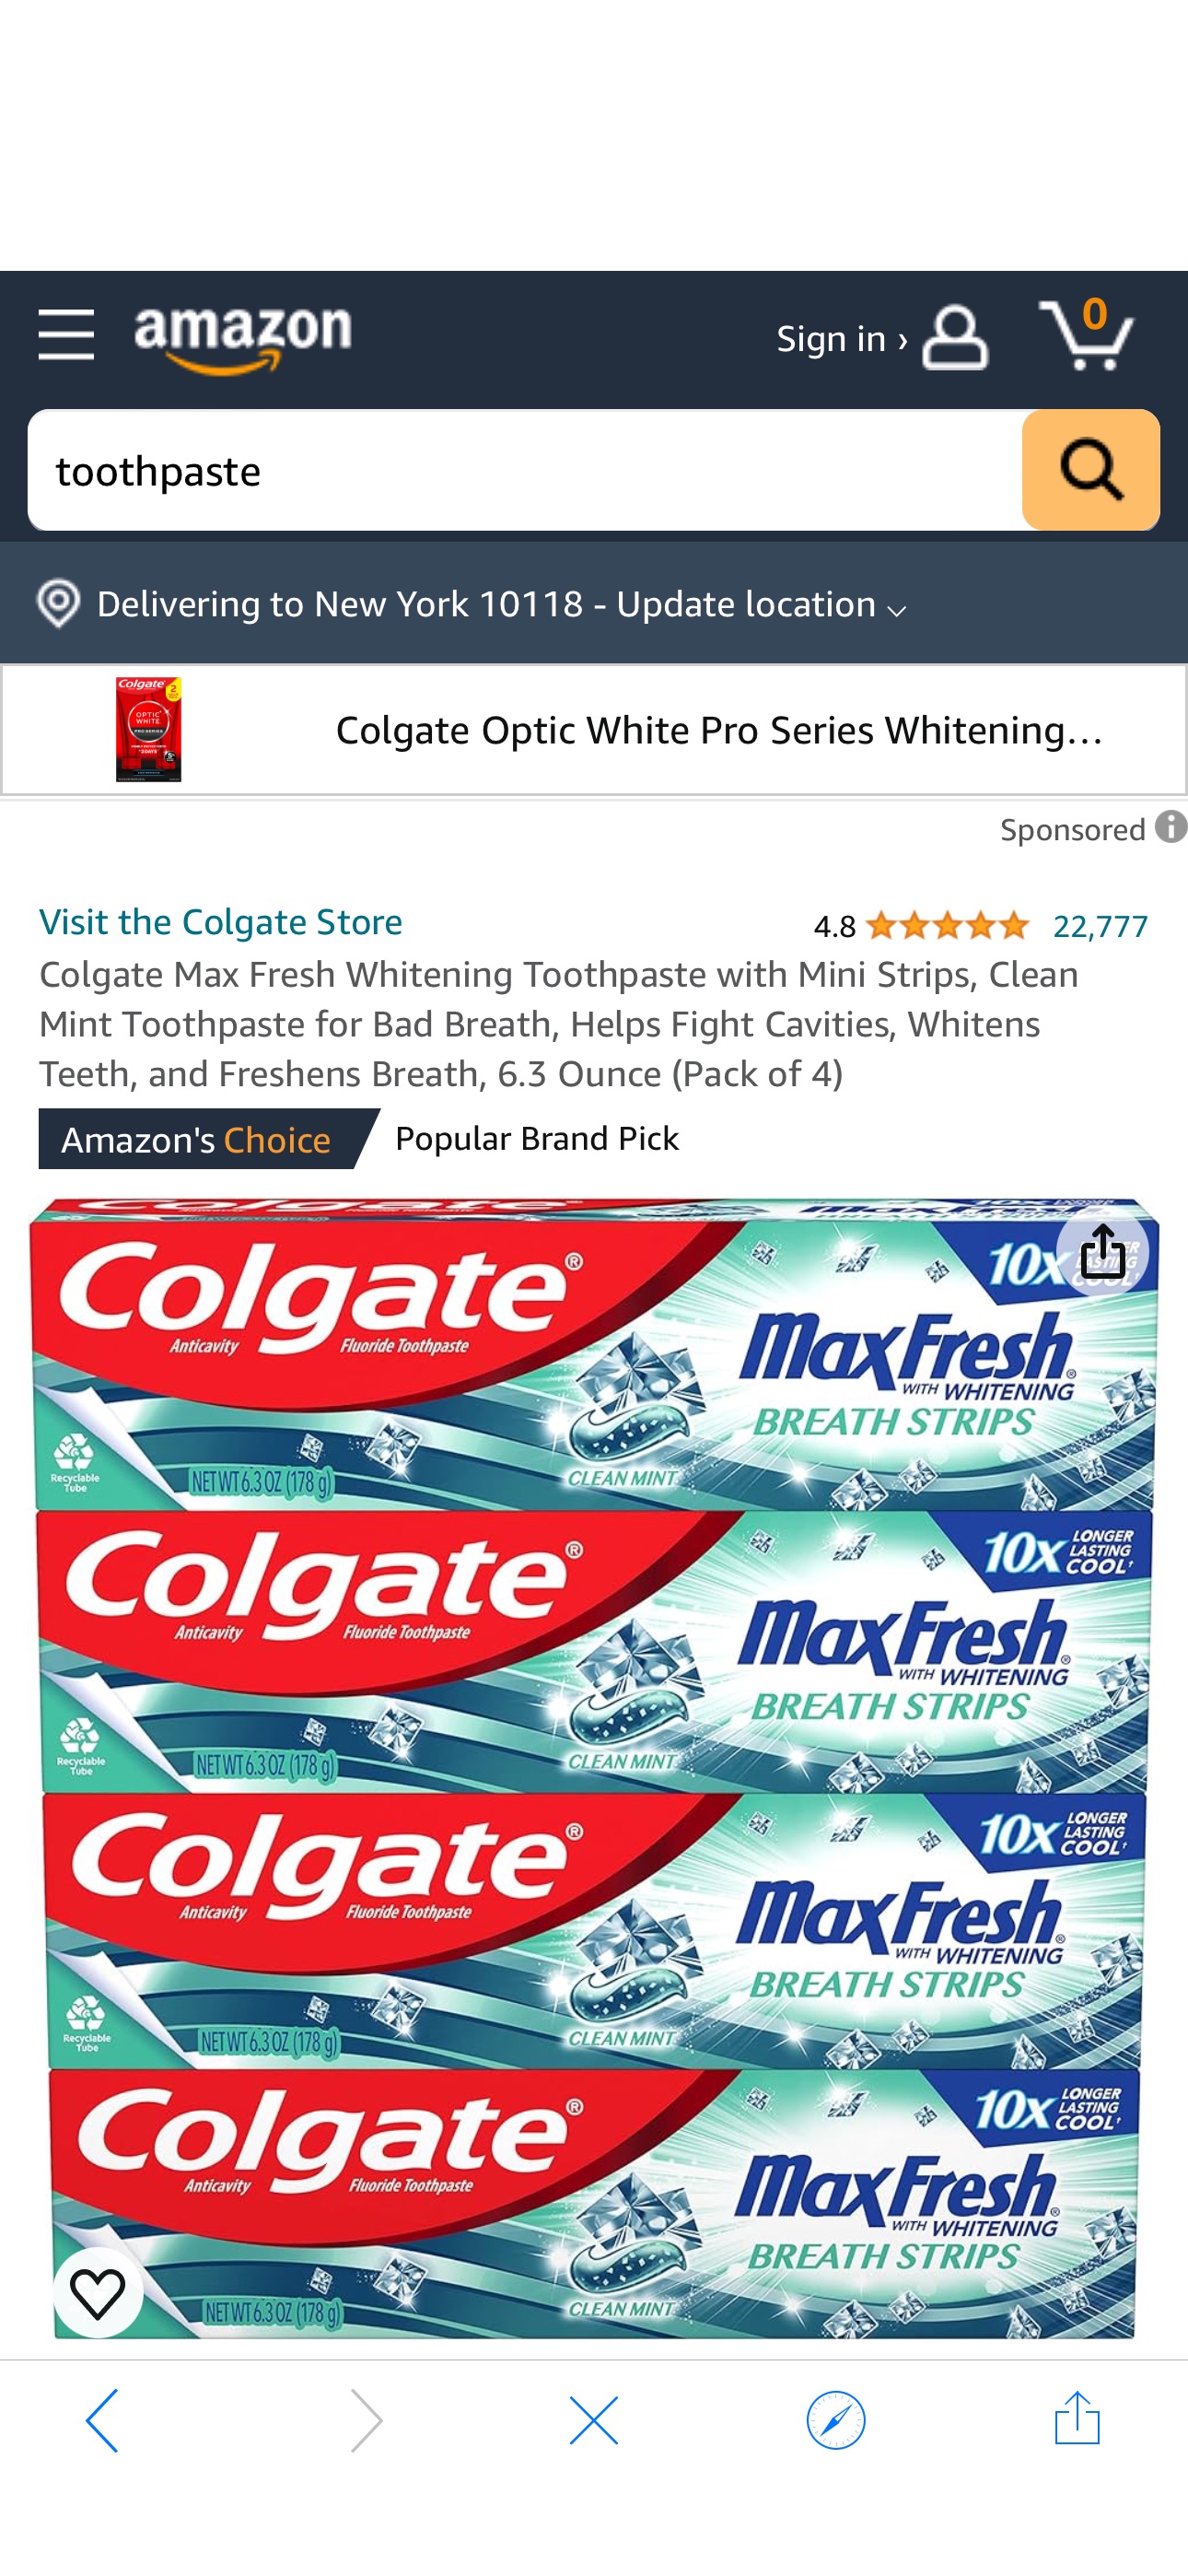 Amazon.com : Colgate Max Fresh Whitening Toothpaste with Mini Strips, Clean Mint Toothpaste for Bad Breath, Helps Fight Cavities, Whitens Teeth, and Freshens Breath, 6.3 Ounce (Pack of 4) : Health & H